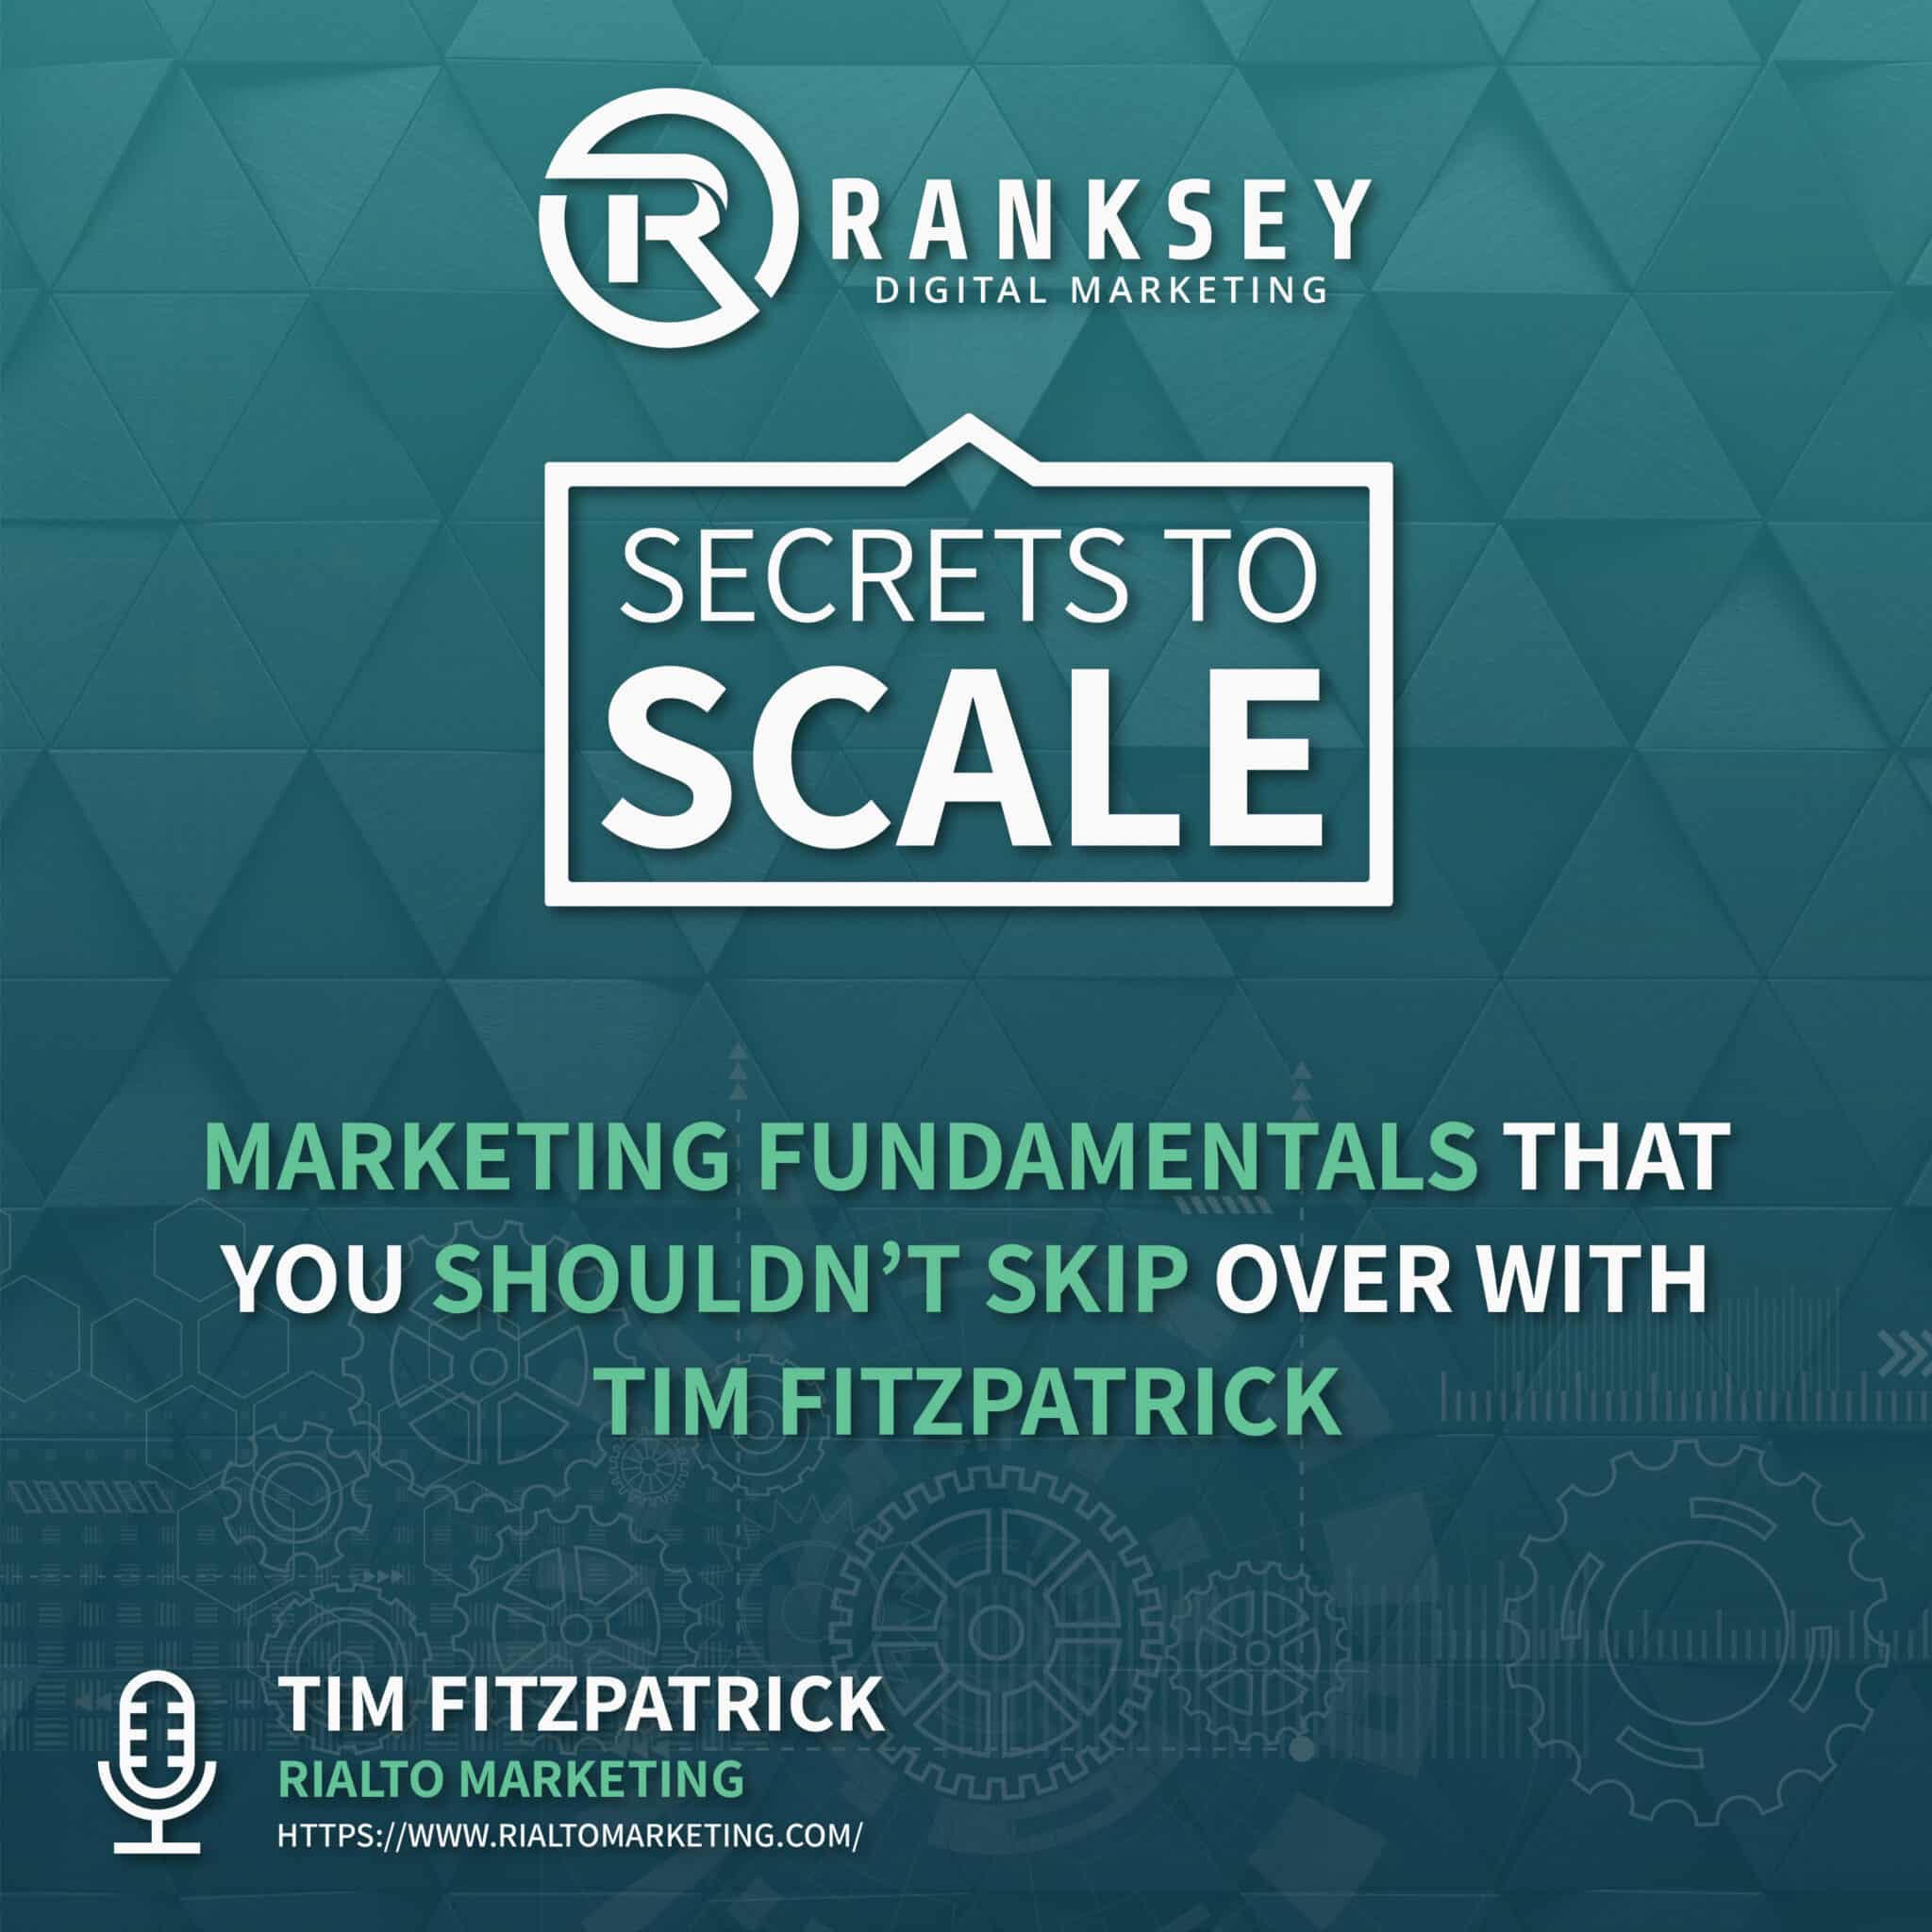 085 Marketing Fundamentals That You Shouldnt Skip Over With Tim Fitzpatrick scaled